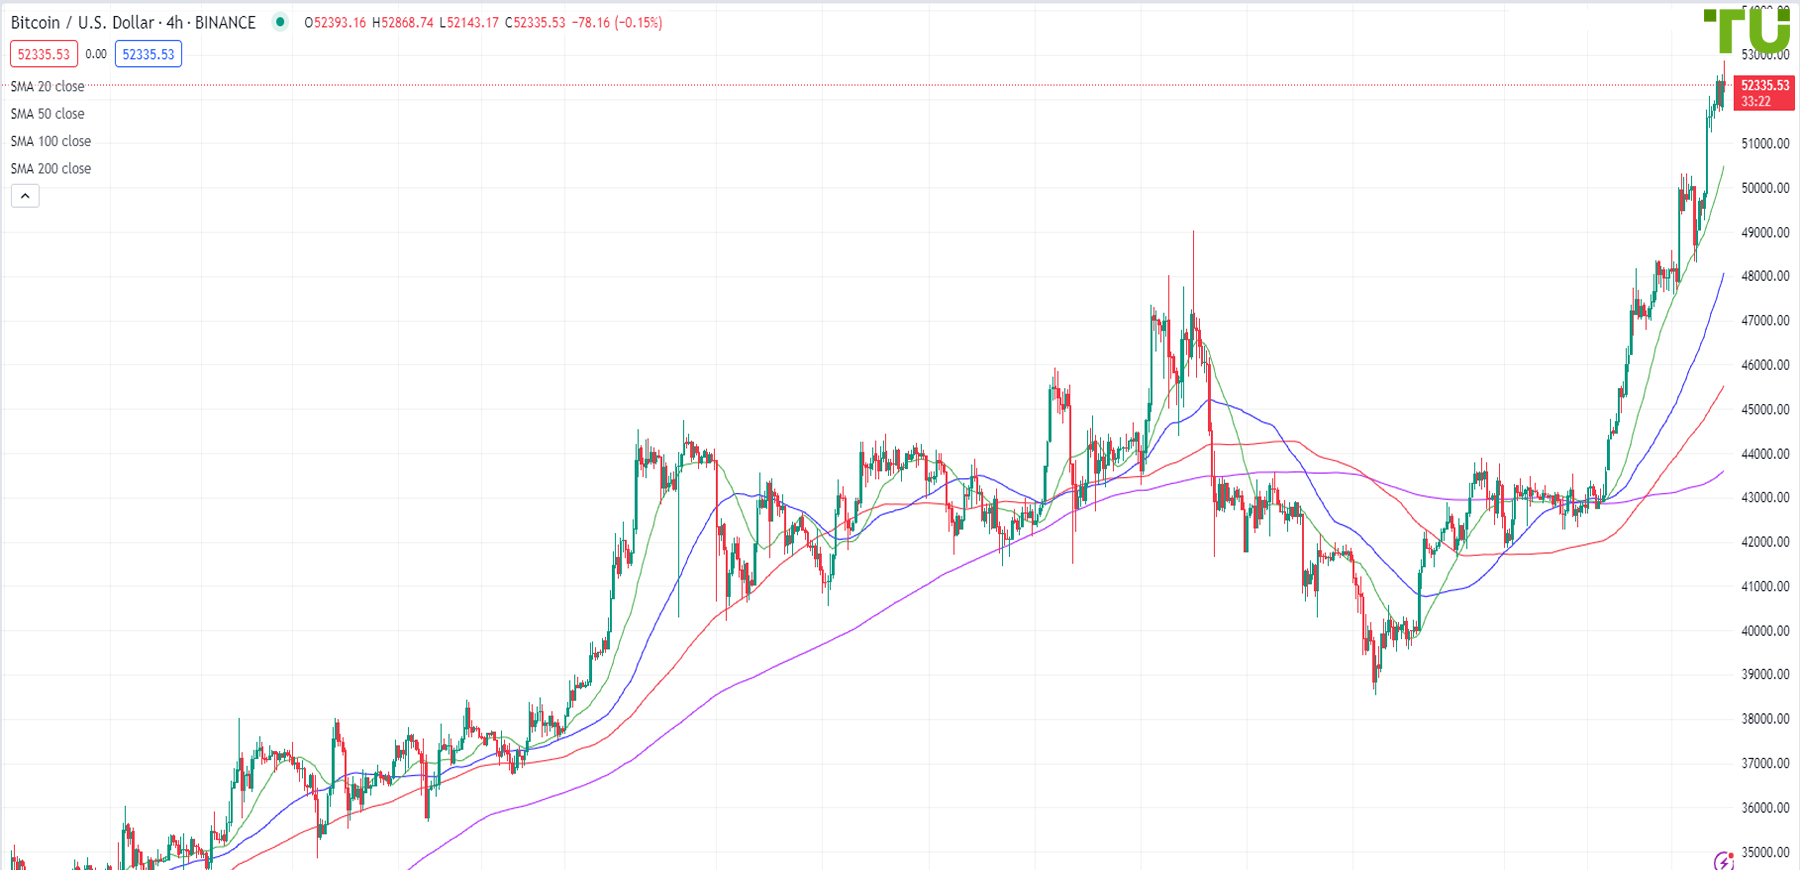 BTC/USD continued its growth and tested 52860